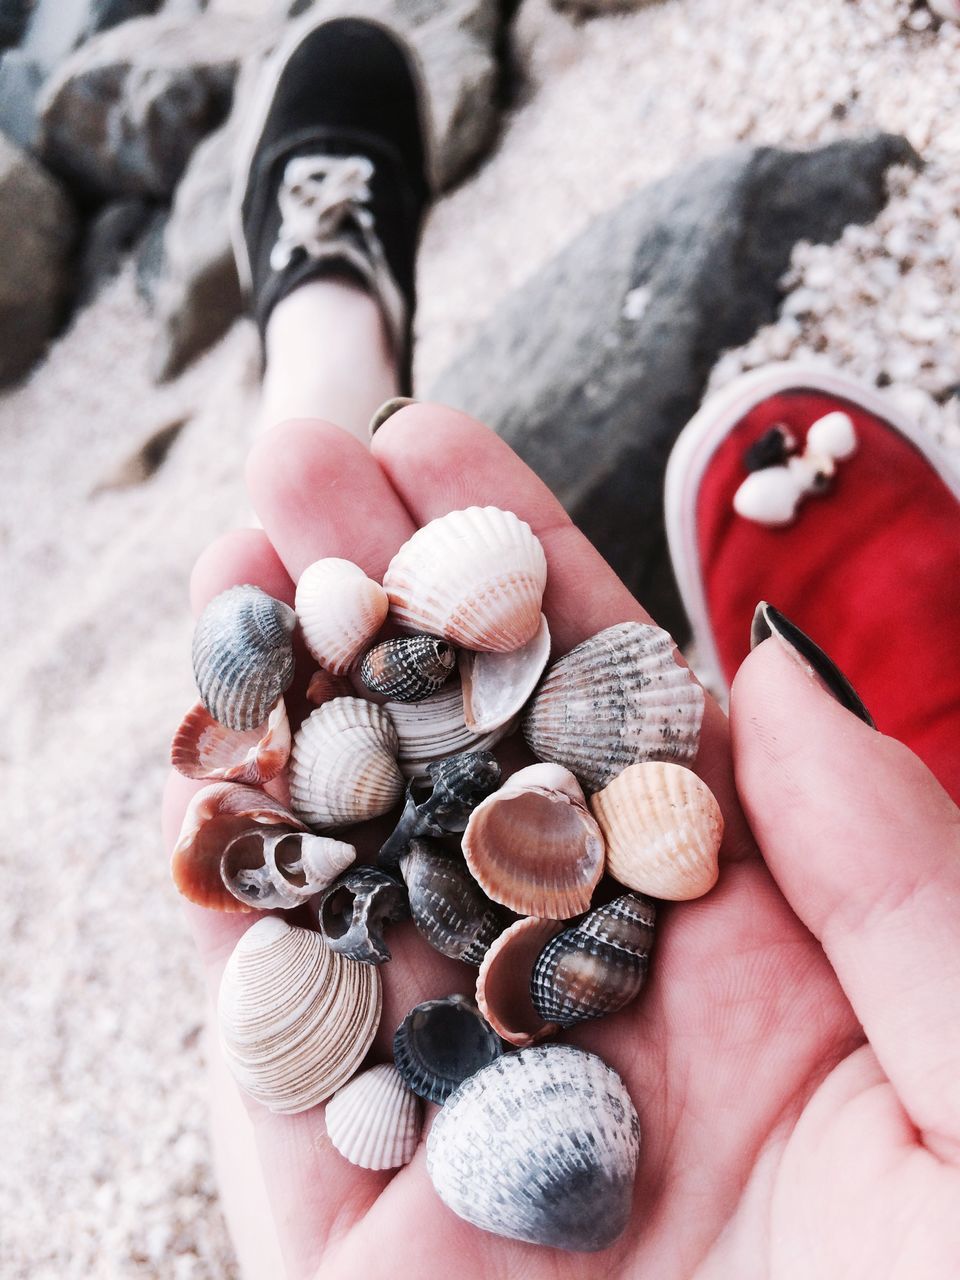 person, close-up, holding, leisure activity, part of, unrecognizable person, lifestyles, beach, food and drink, human finger, focus on foreground, personal perspective, seashell, high angle view, food, ball, pebble